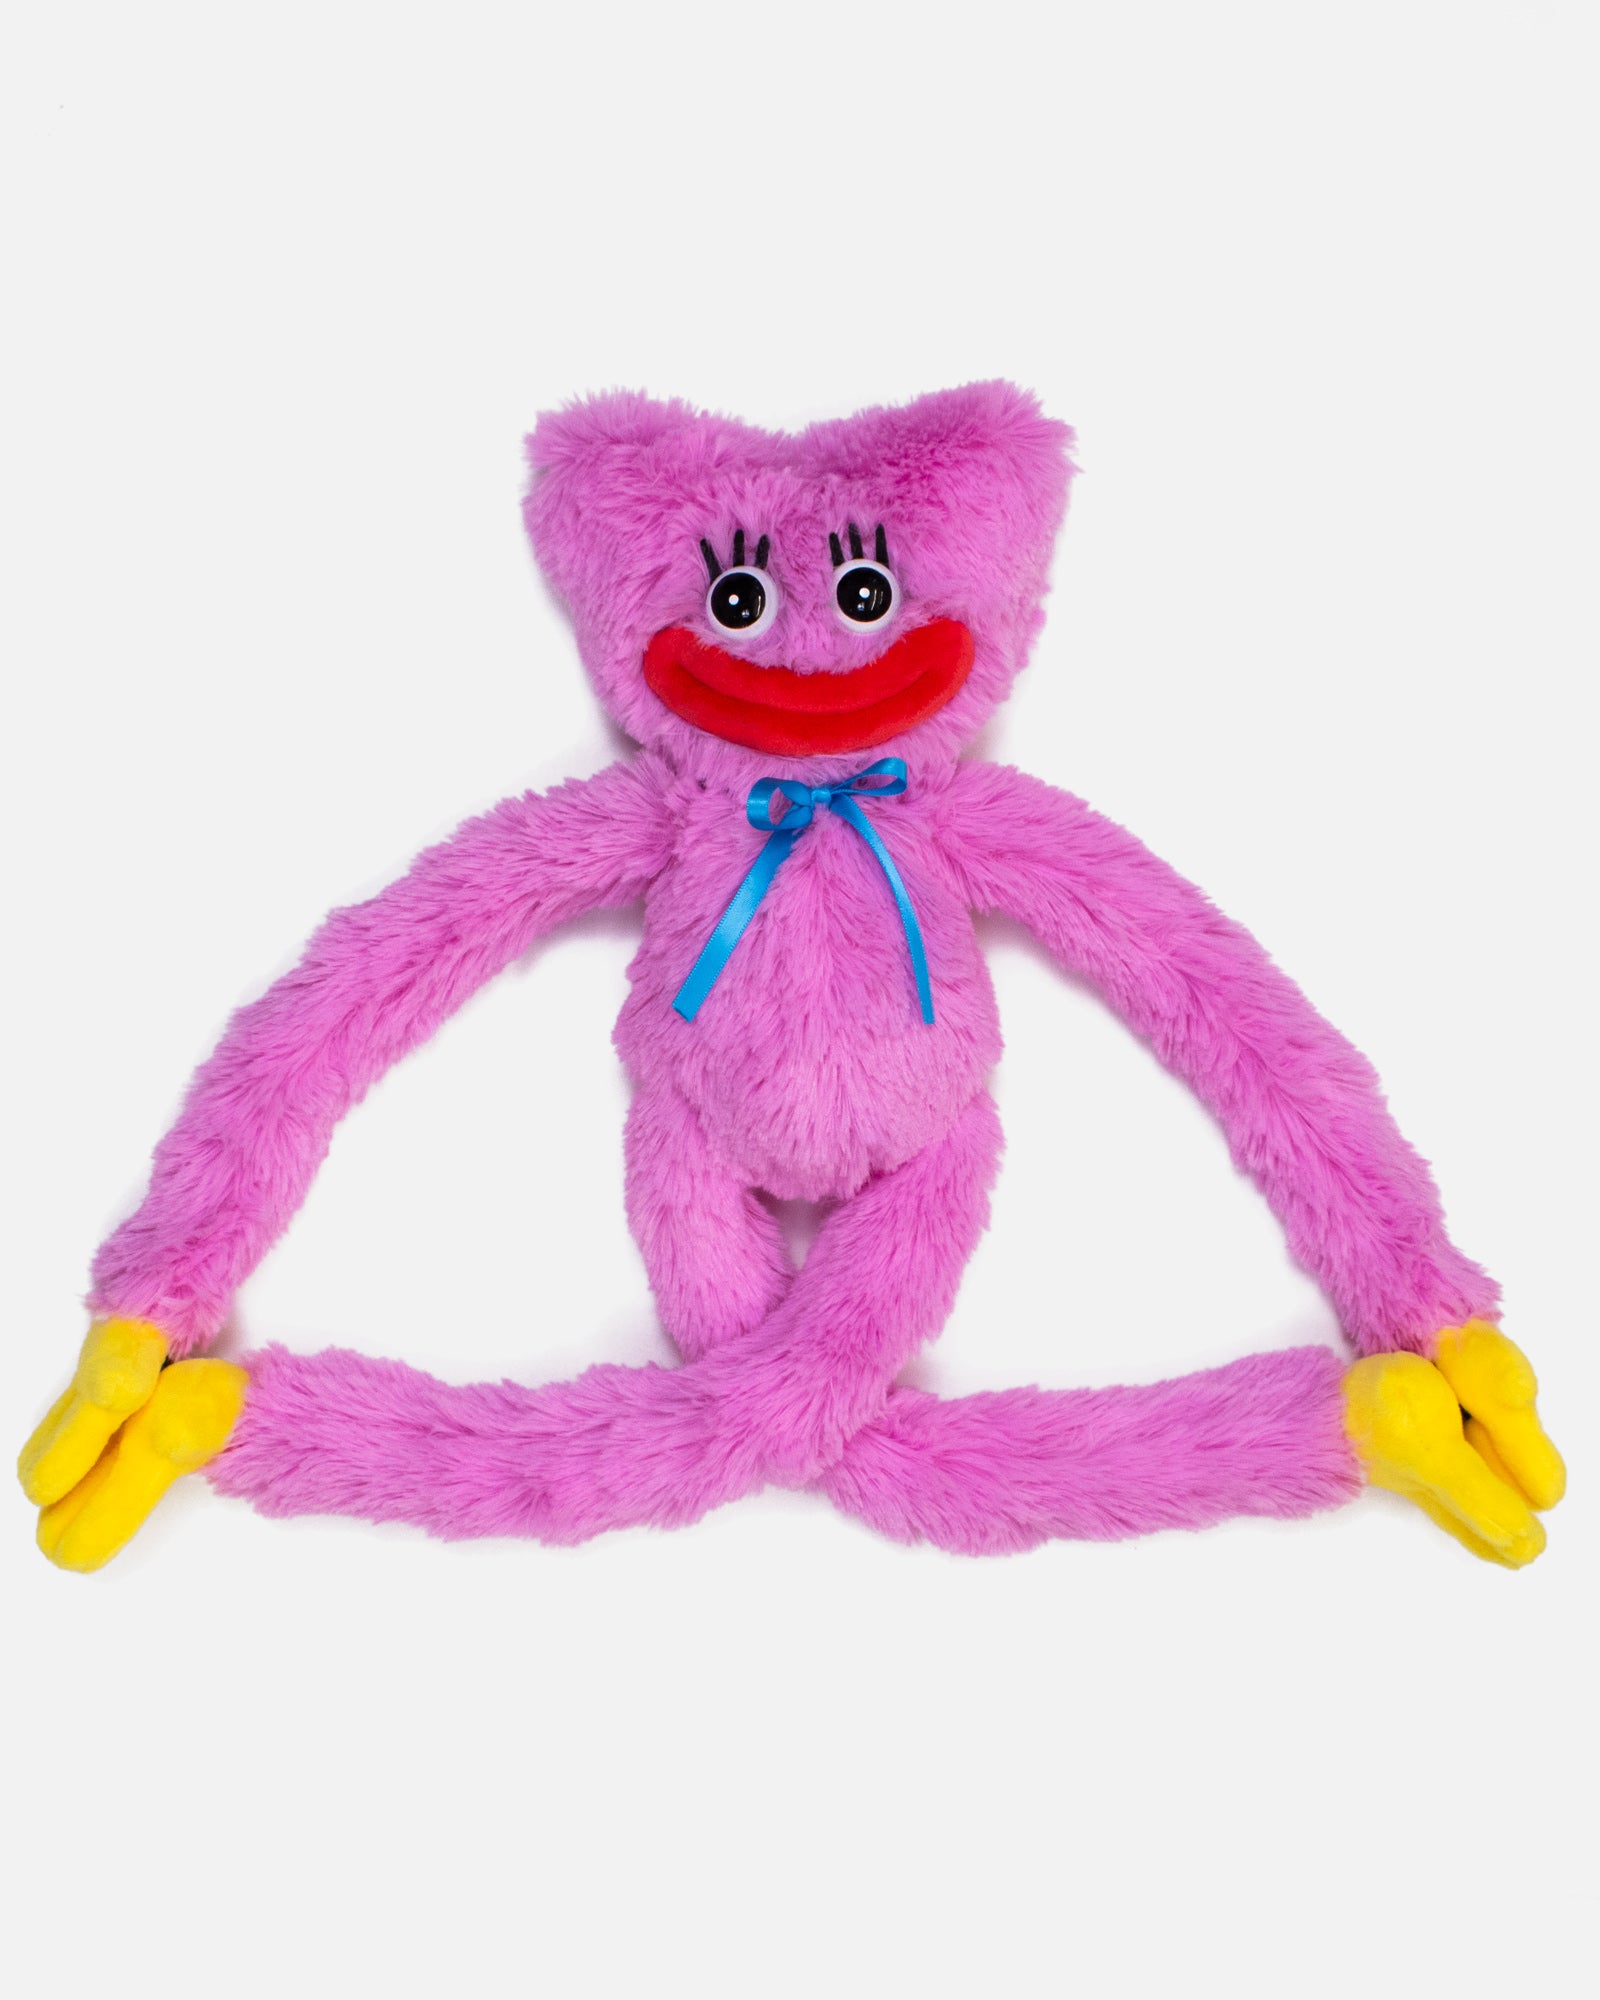 smiling kissy missy poppy playtime 14" plush front. hands and feet velcro together.